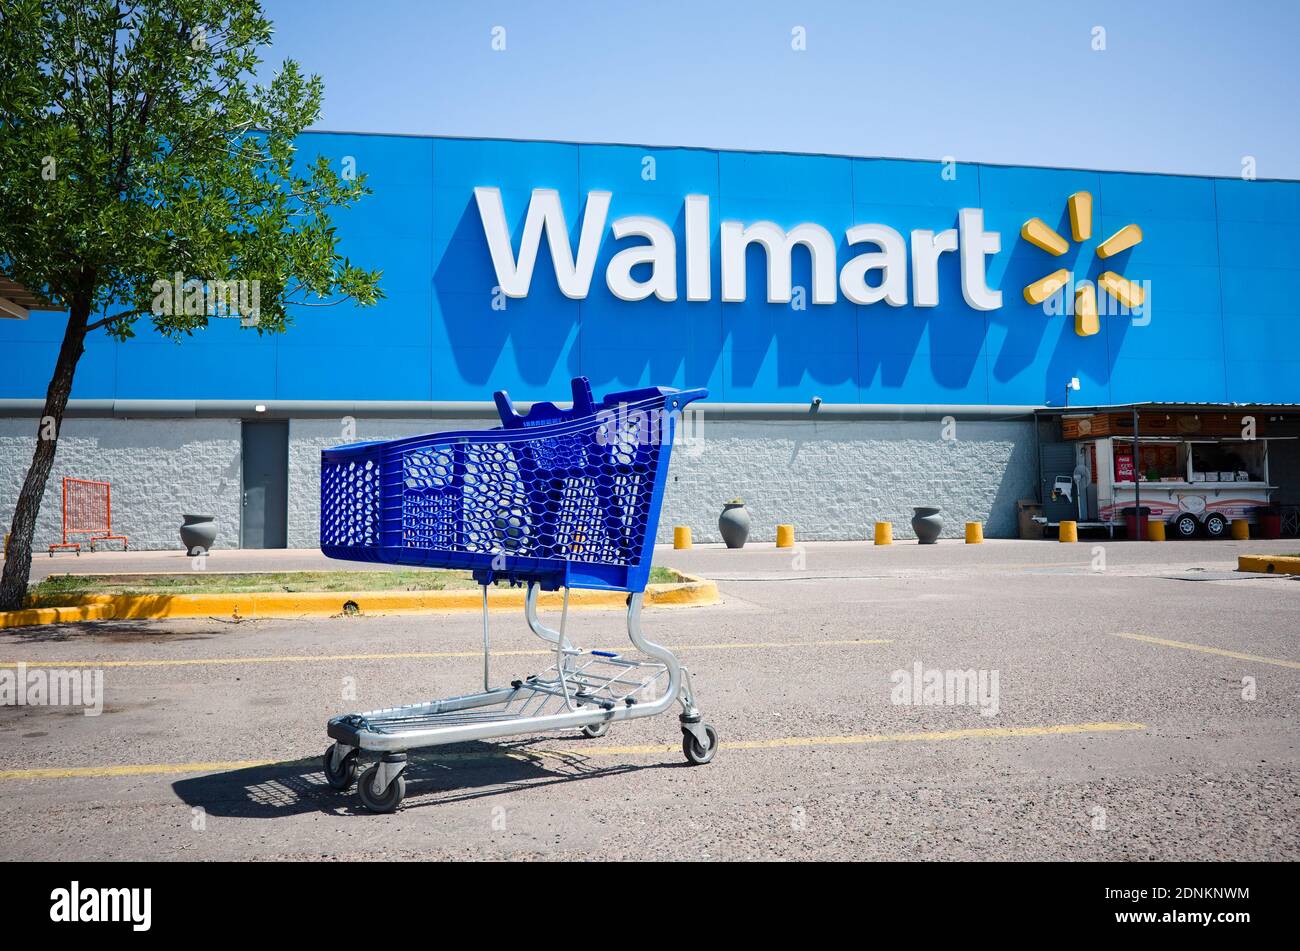 Mendoza, Argentina - January, 2020: Shopping cart on a parking lot in front of main entrance to Walmart supermarket outdoor on the street with no peop Stock Photo